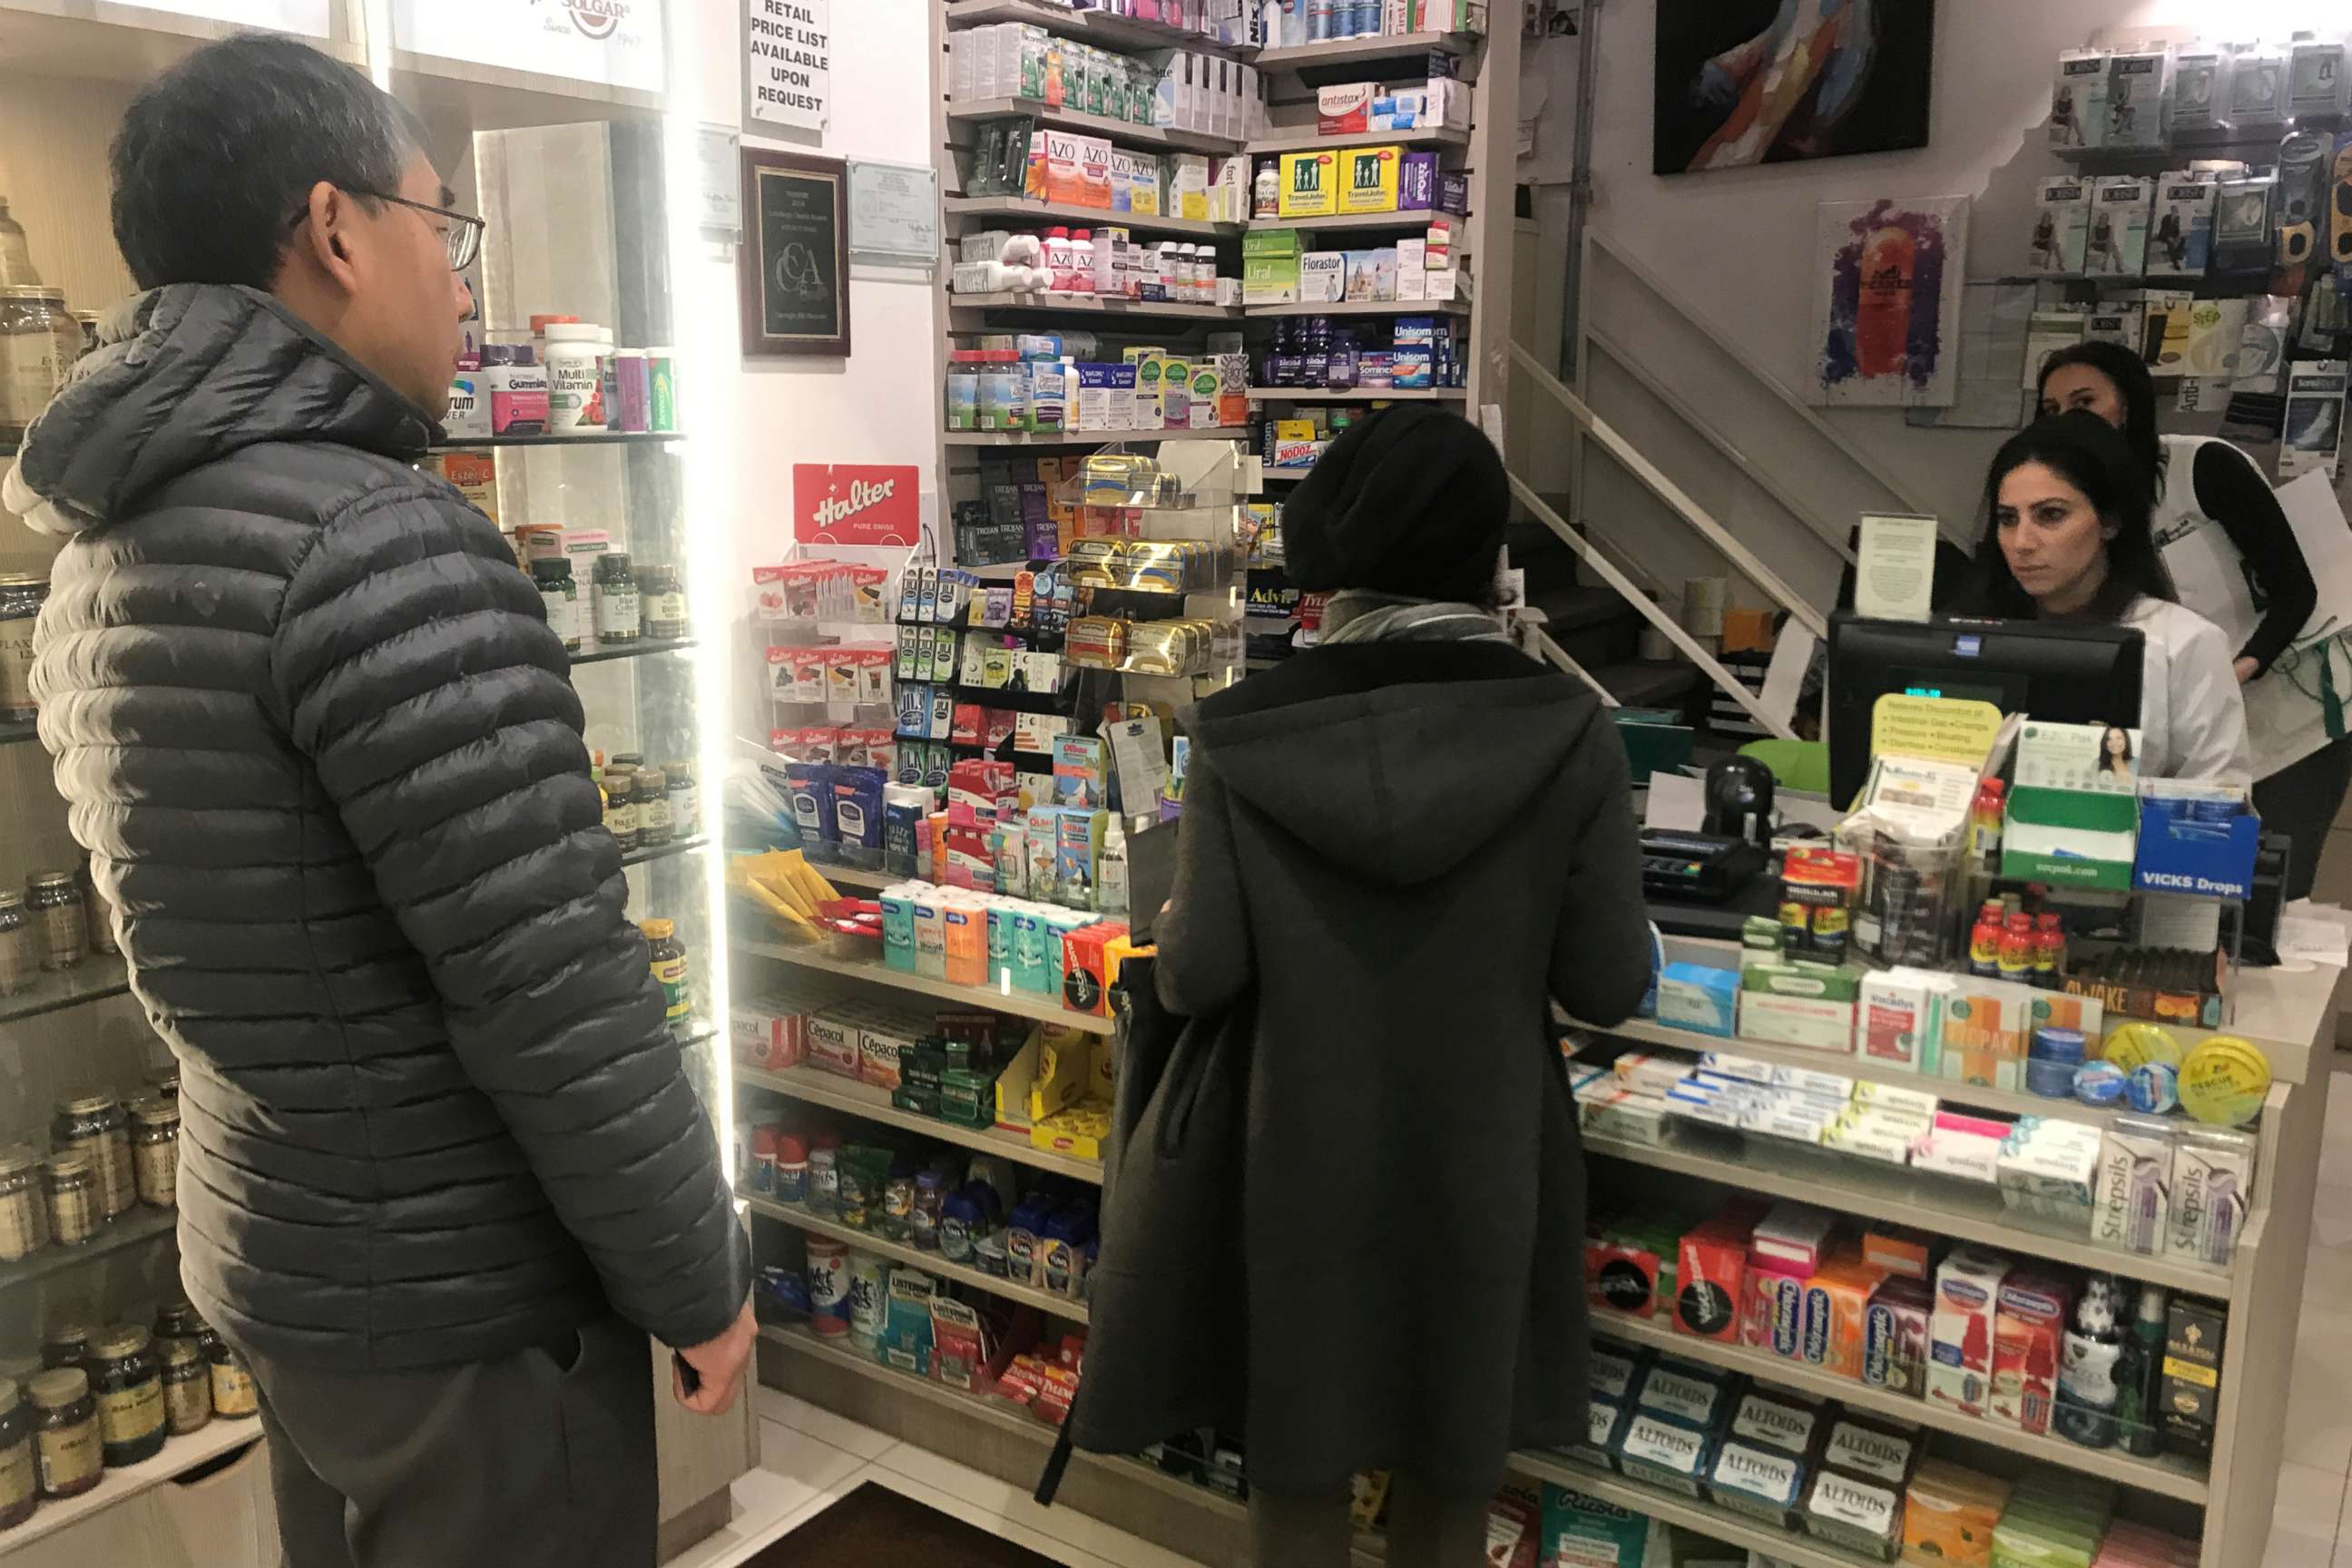 PHOTO: People line up at a pharmacy to purchase N95 face masks in advance of the potential coronavirus outbreak in the Manhattan borough of New York City, New York, Feb. 27, 2020.